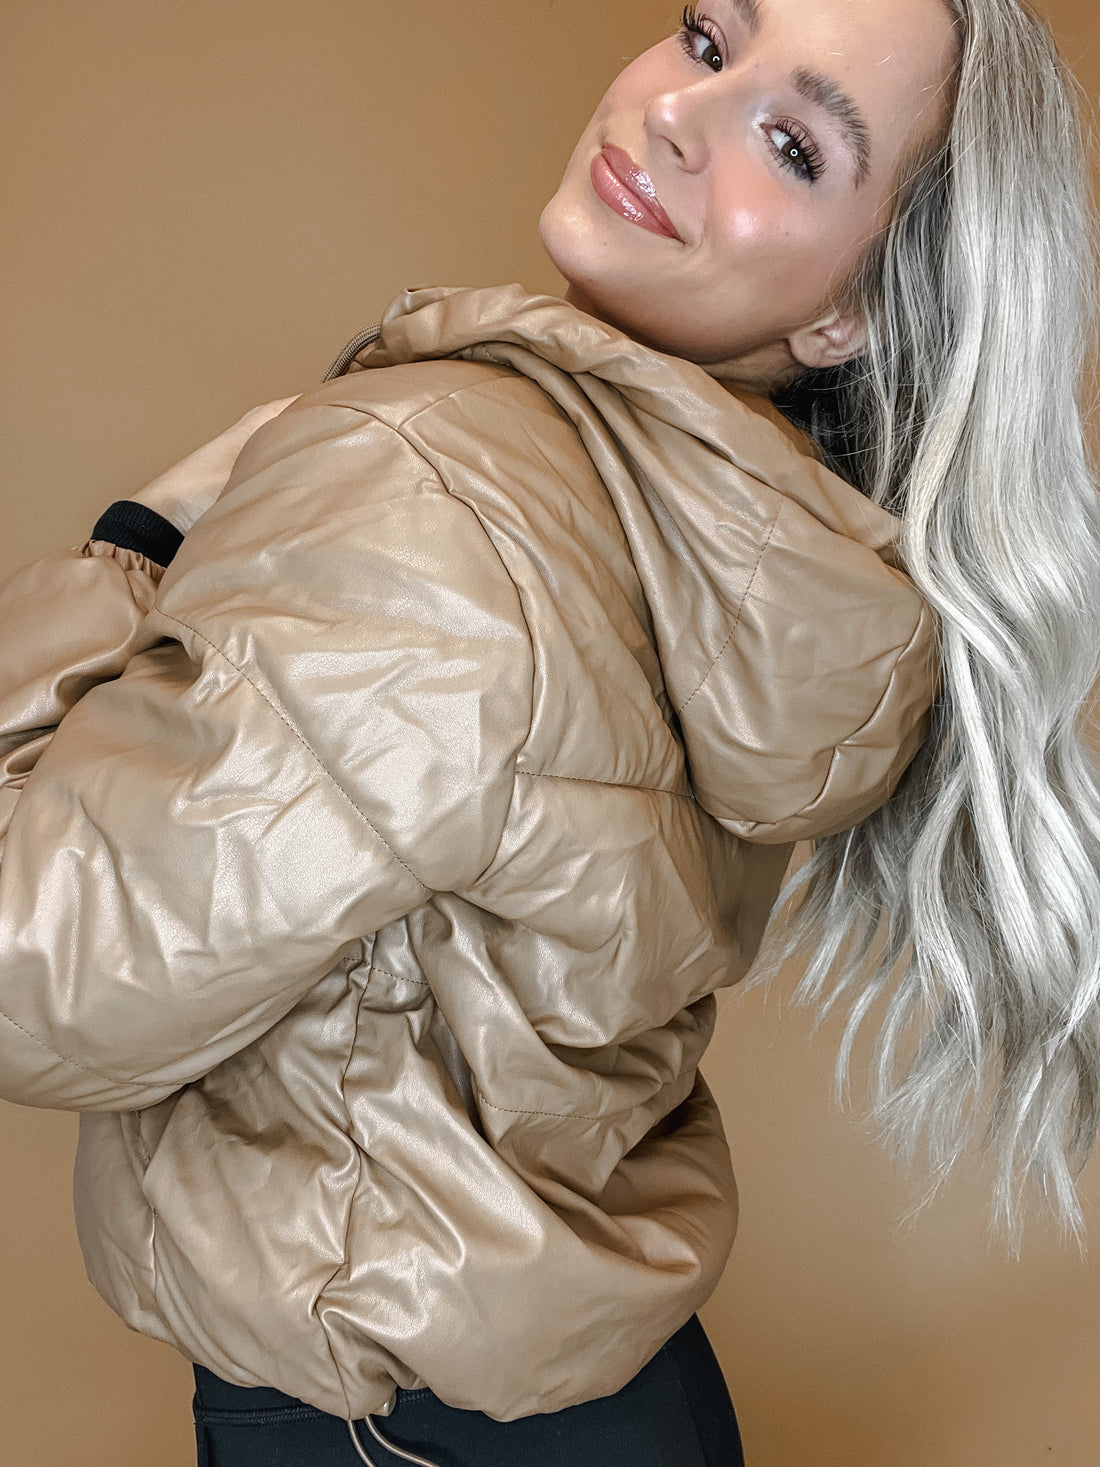 Leather Hooded Puffer Jacket